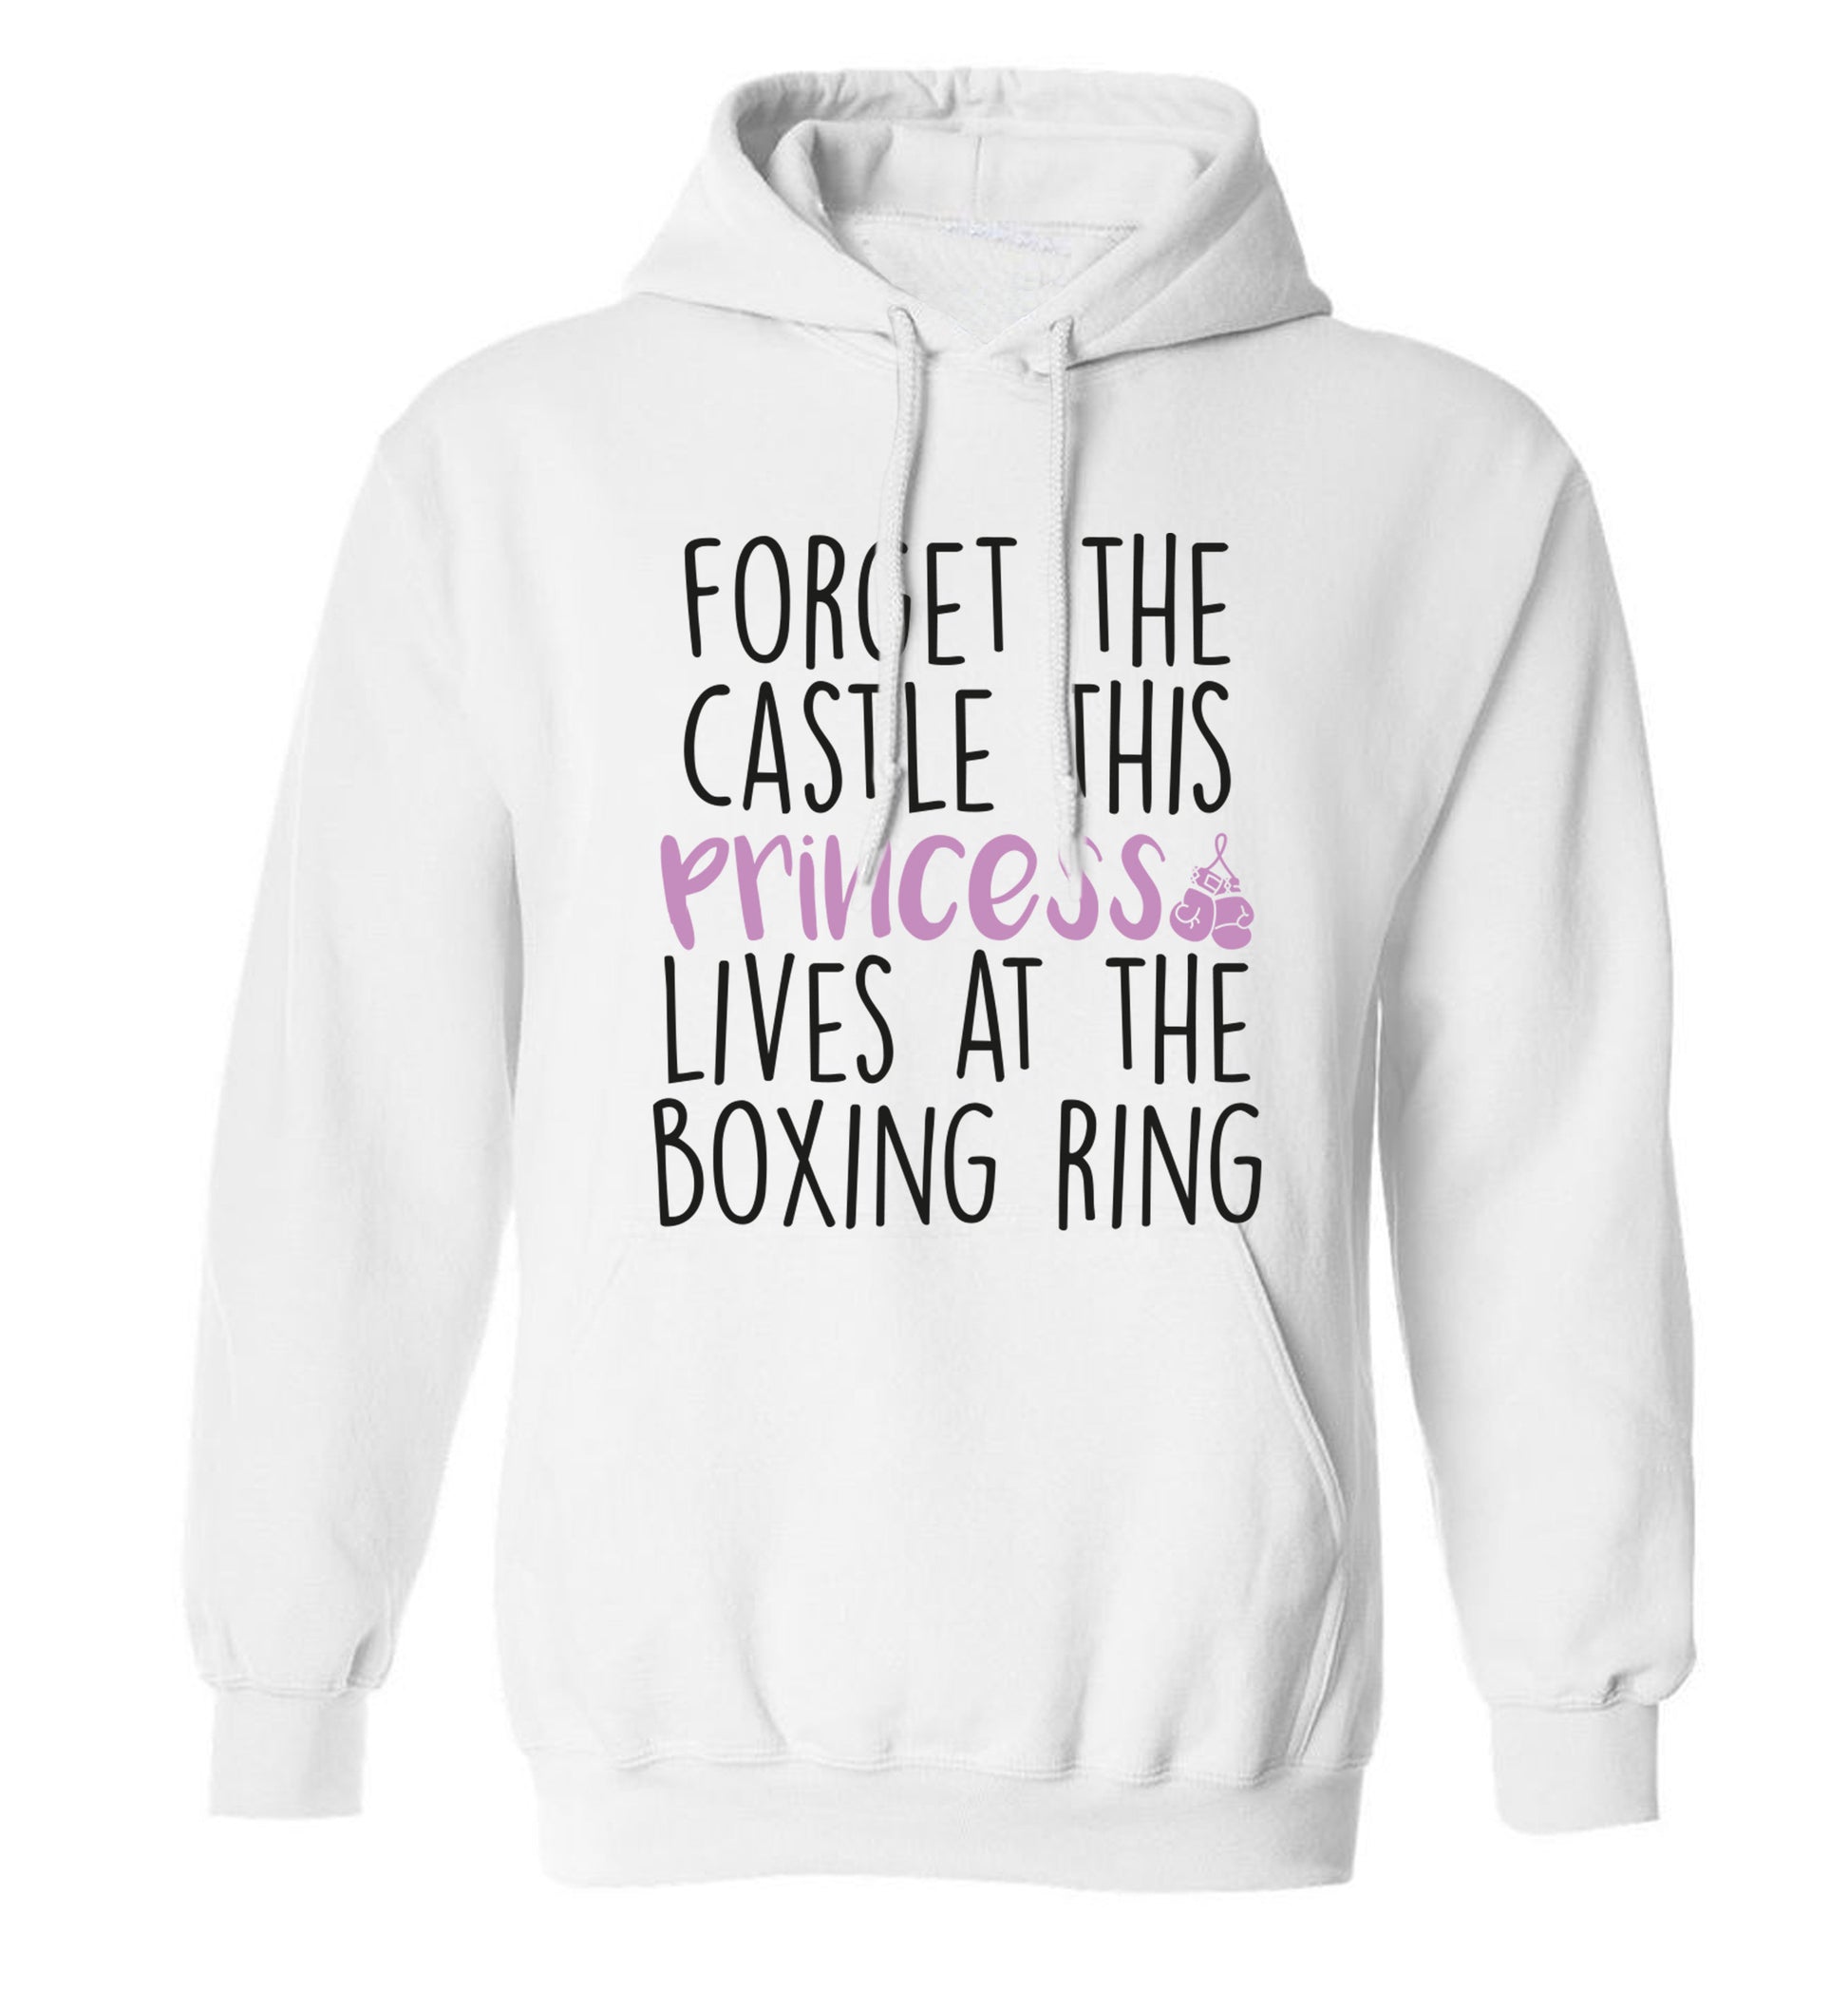 Forget the castle this princess lives at the boxing ring adults unisex white hoodie 2XL